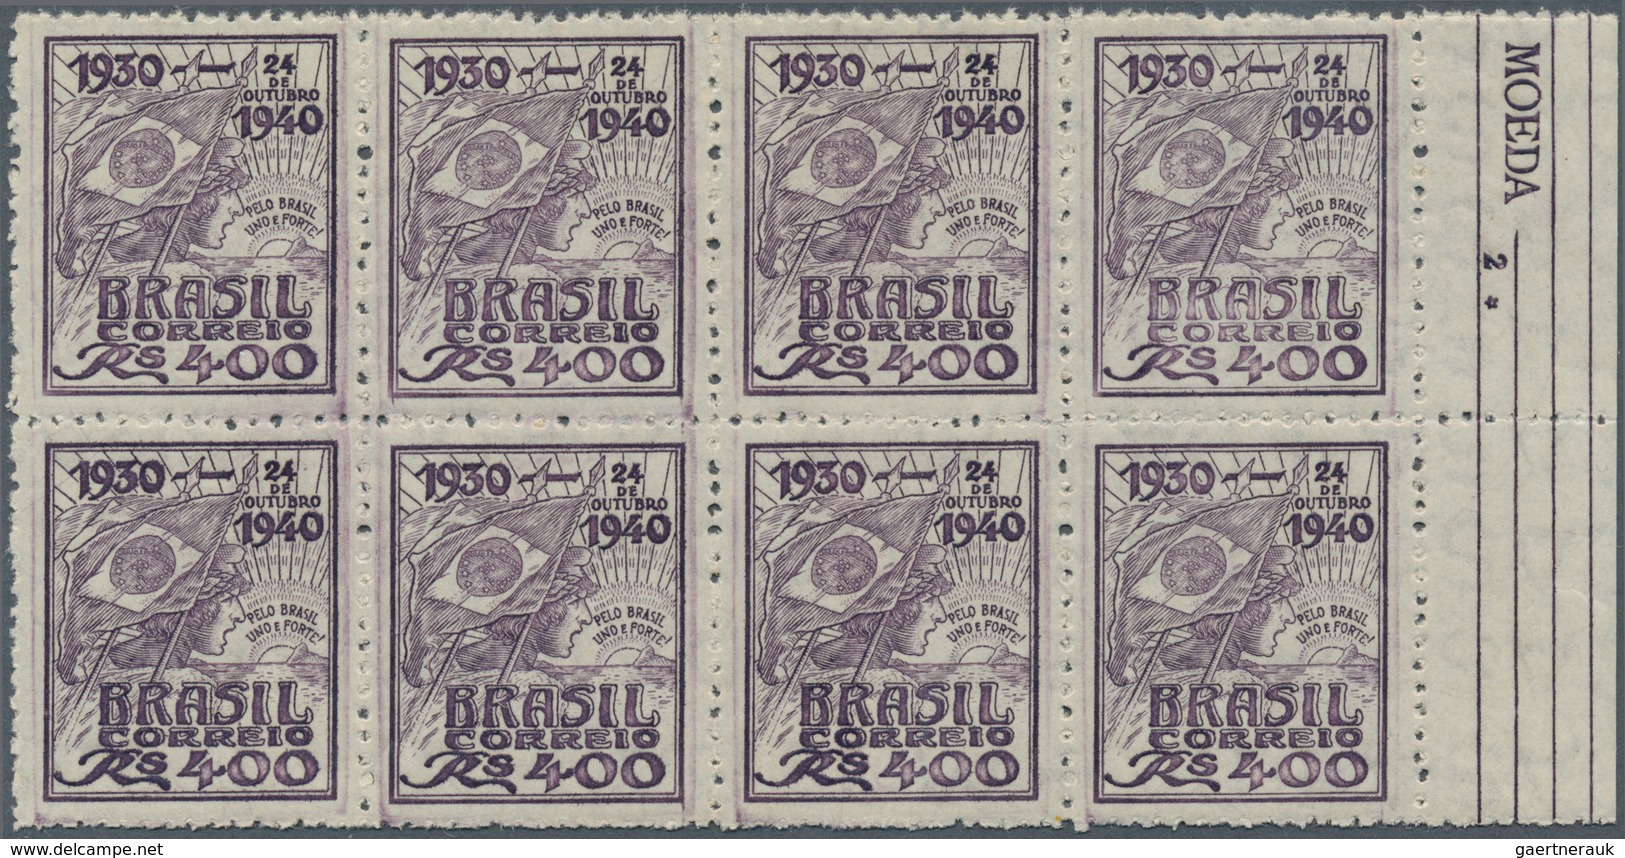 Brasilien: 1940, 10 Years Government Of Getulio Vargas 400r. Dark Lilac Showing Flag Of Brazil With - Nuevos